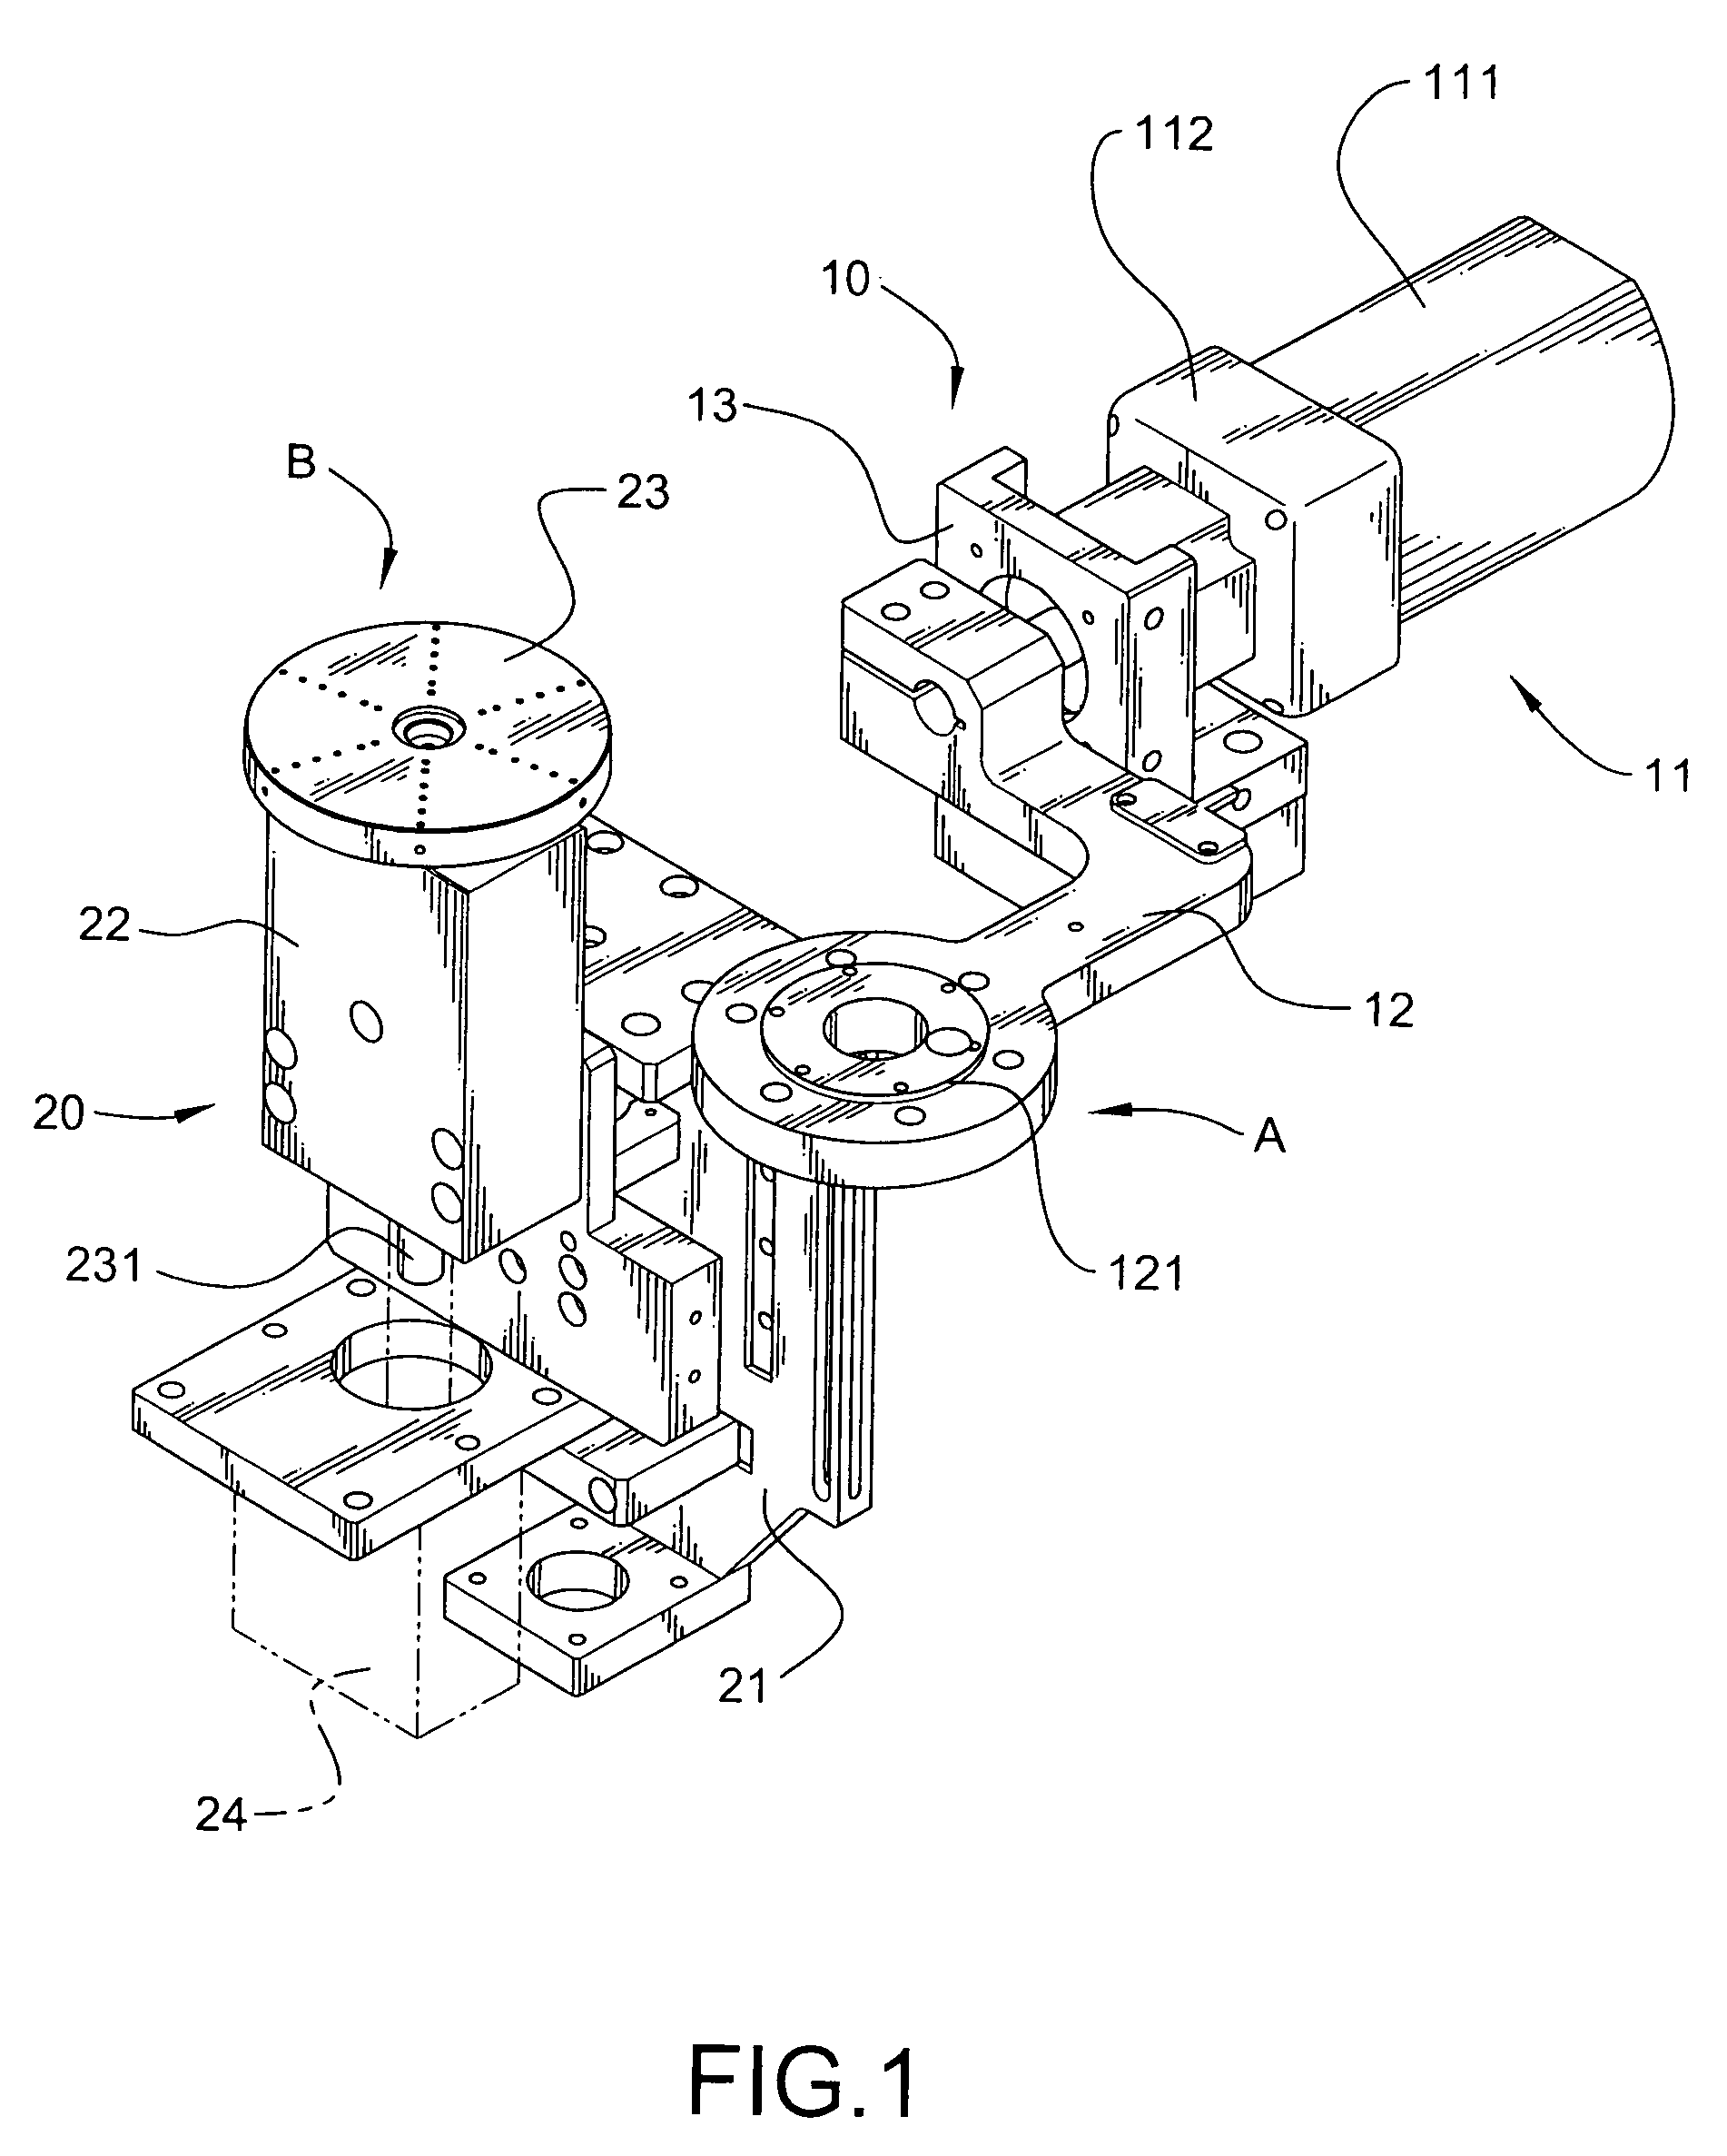 Integration device for compact disk